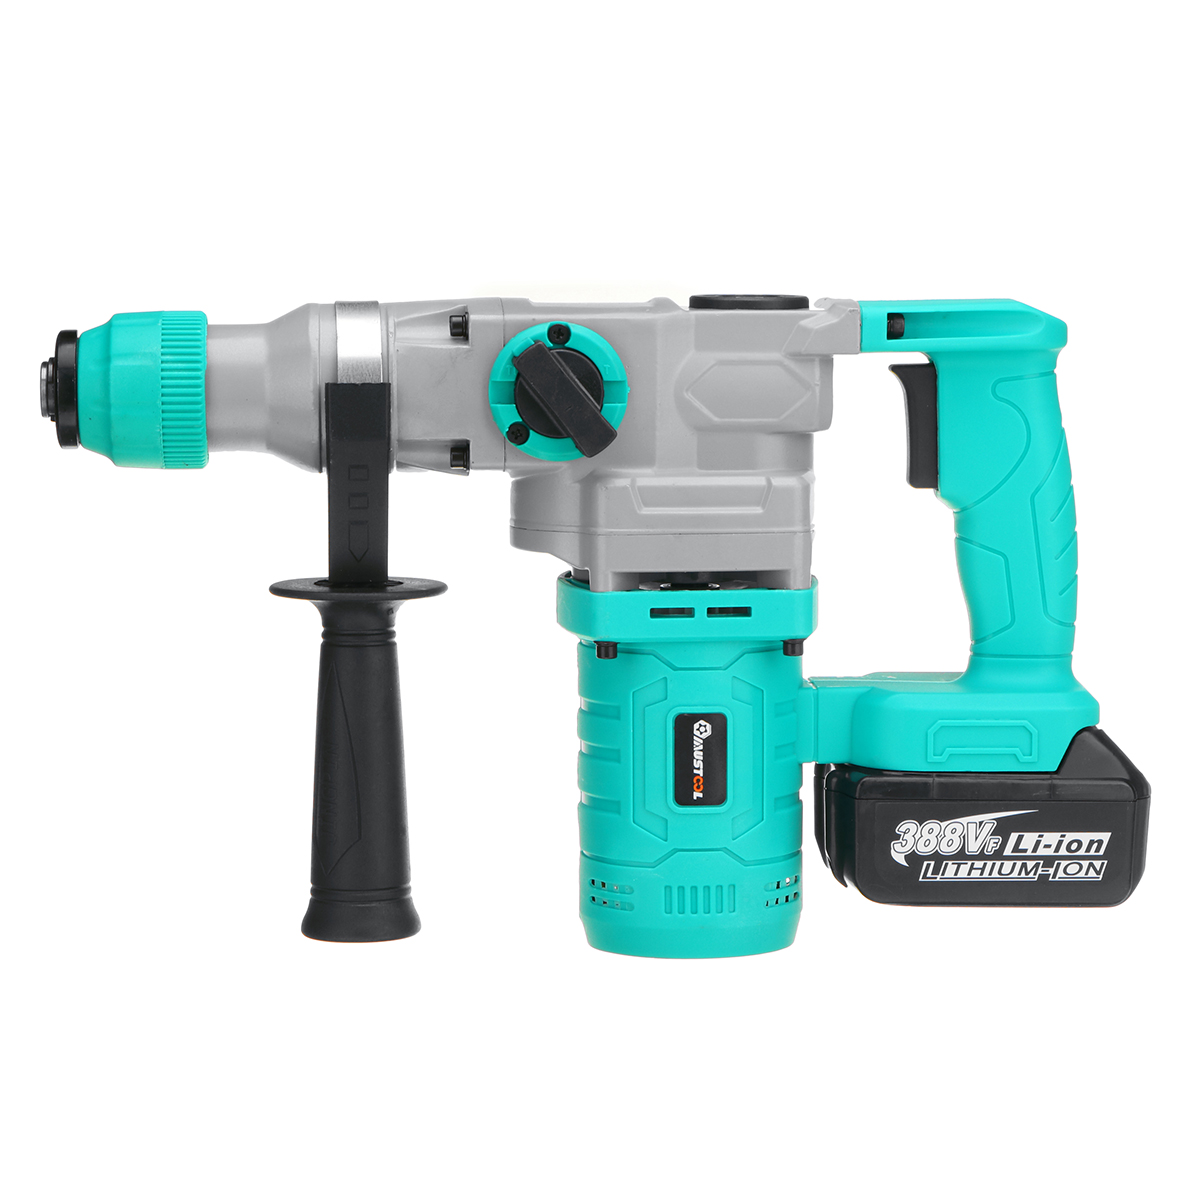 Find 2000W 388VF 6200rpm Electric Rotary Hammer Woodworking Tool with/without Battery for Sale on Gipsybee.com with cryptocurrencies